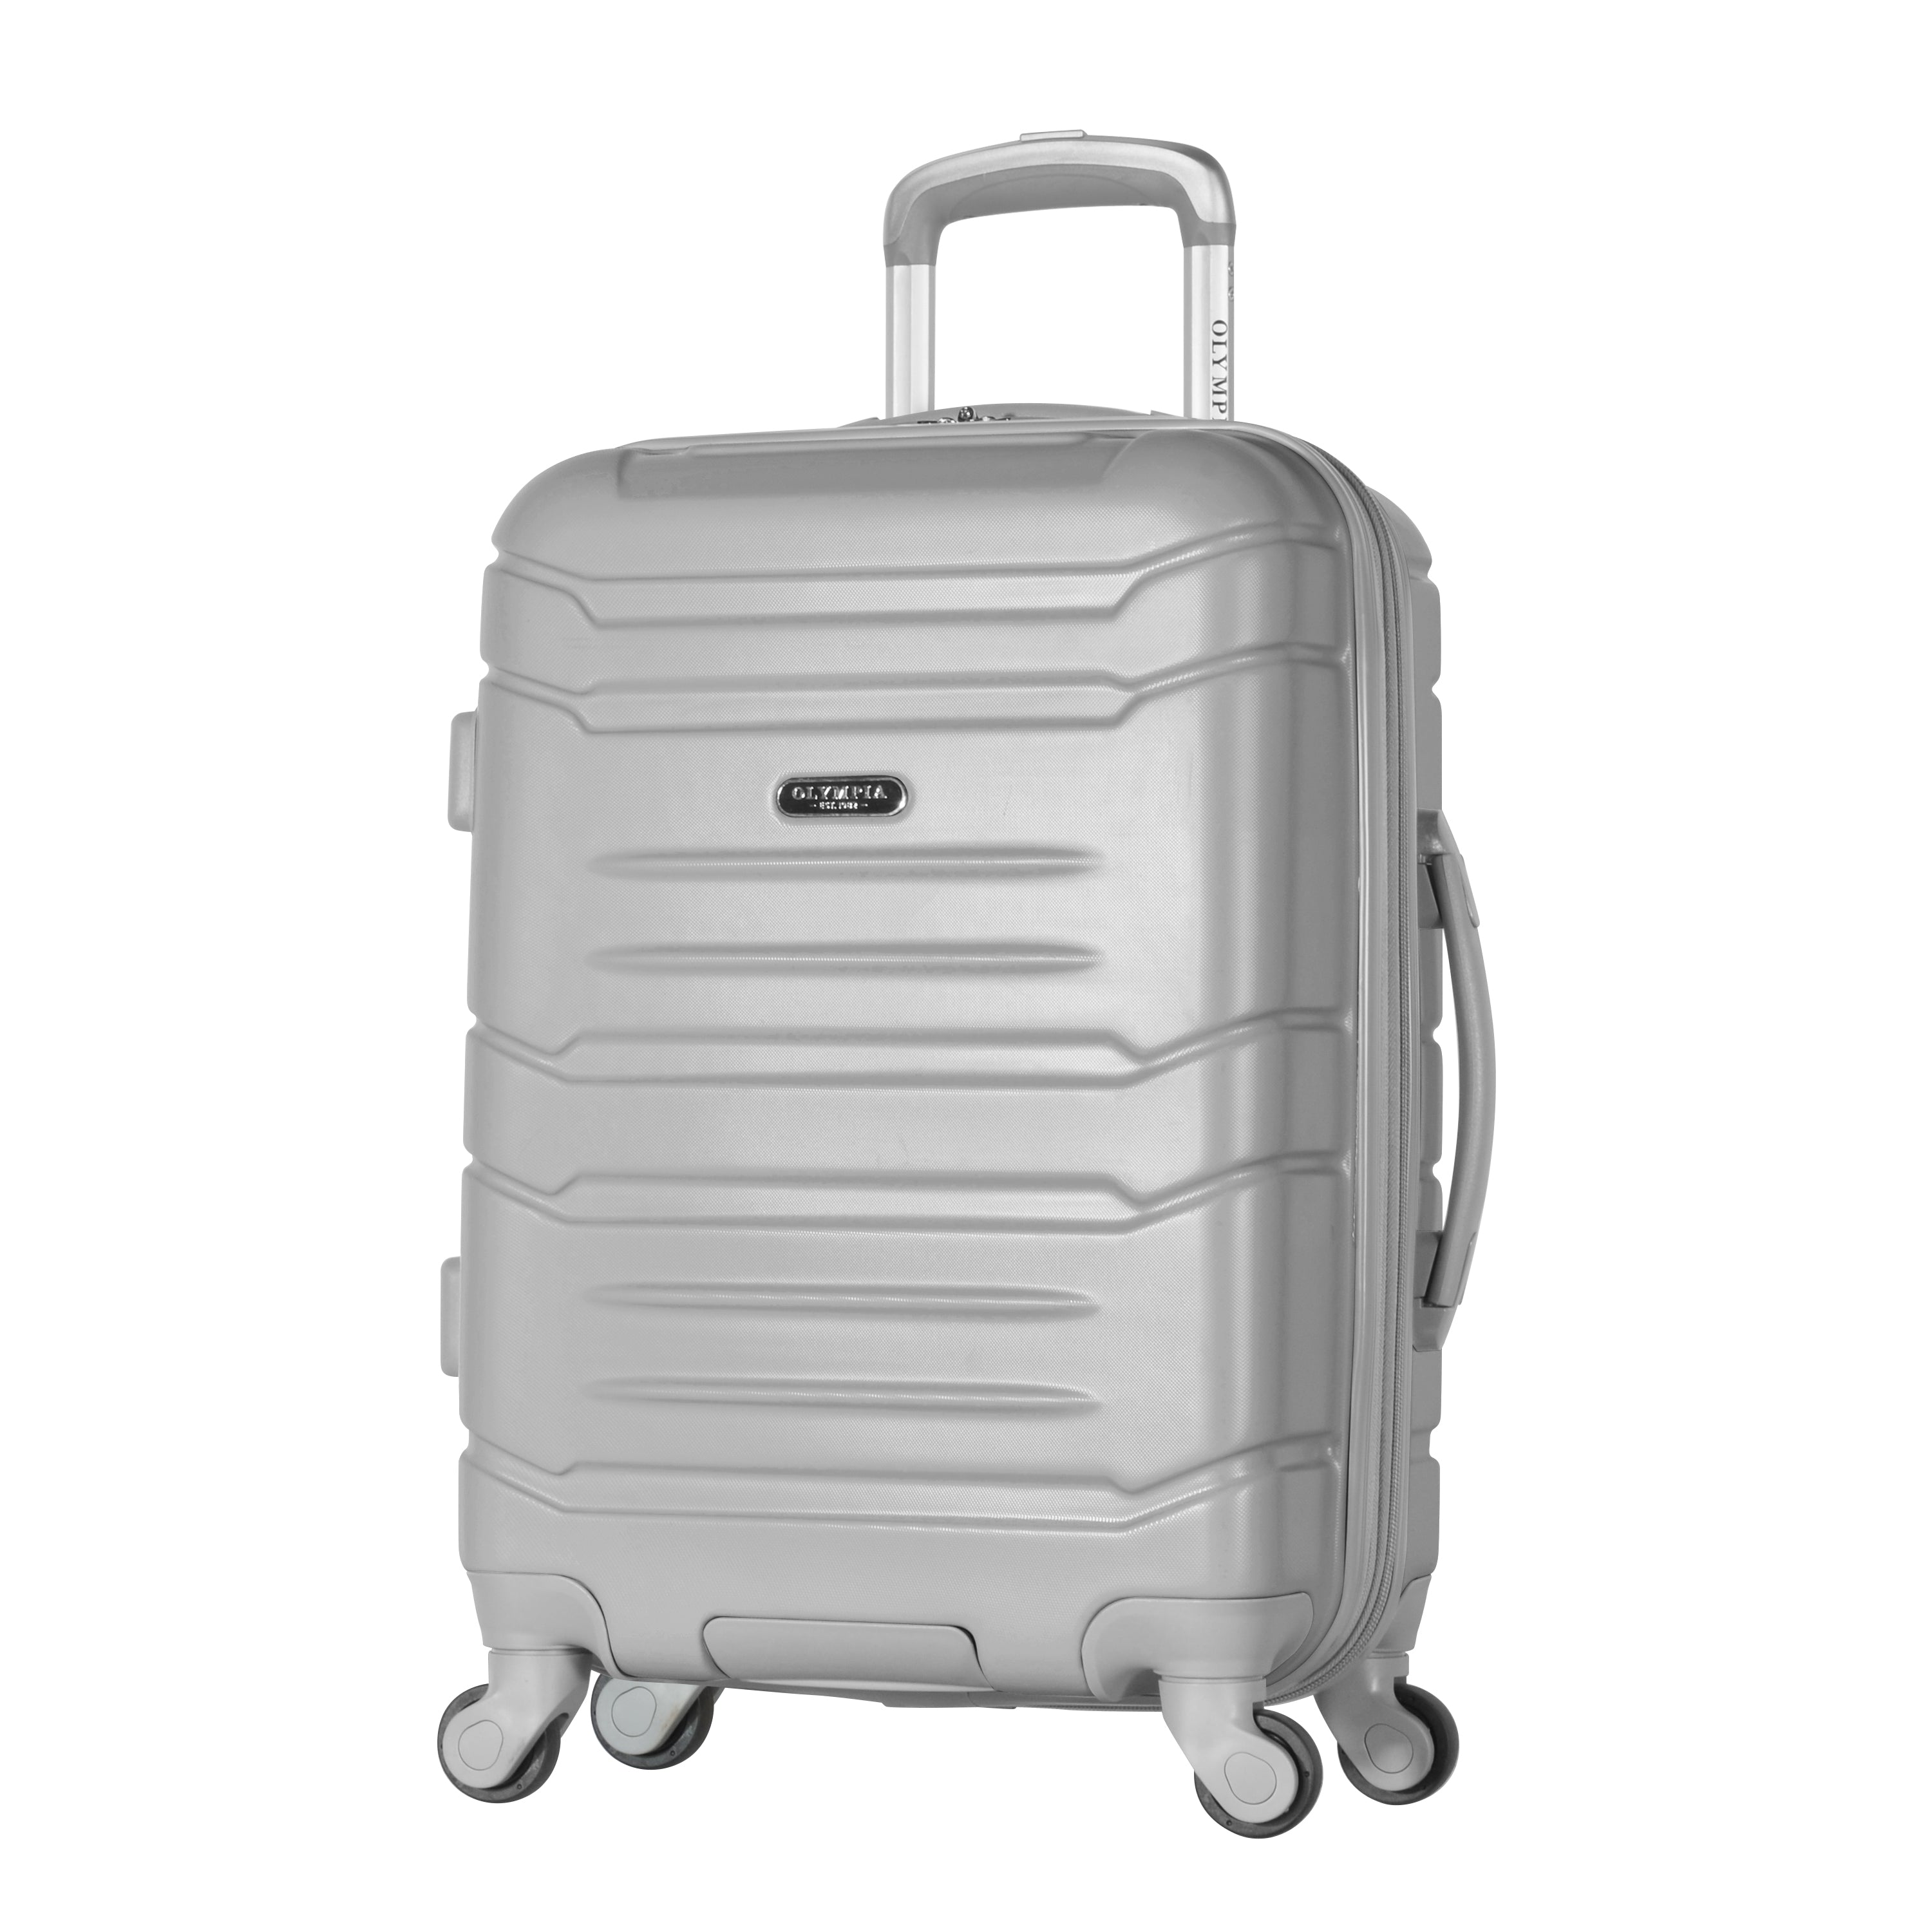 {Mother's Day Special}Olympia Denmark 21-inch Expandable Carry-On with 4-Wheel Spinner